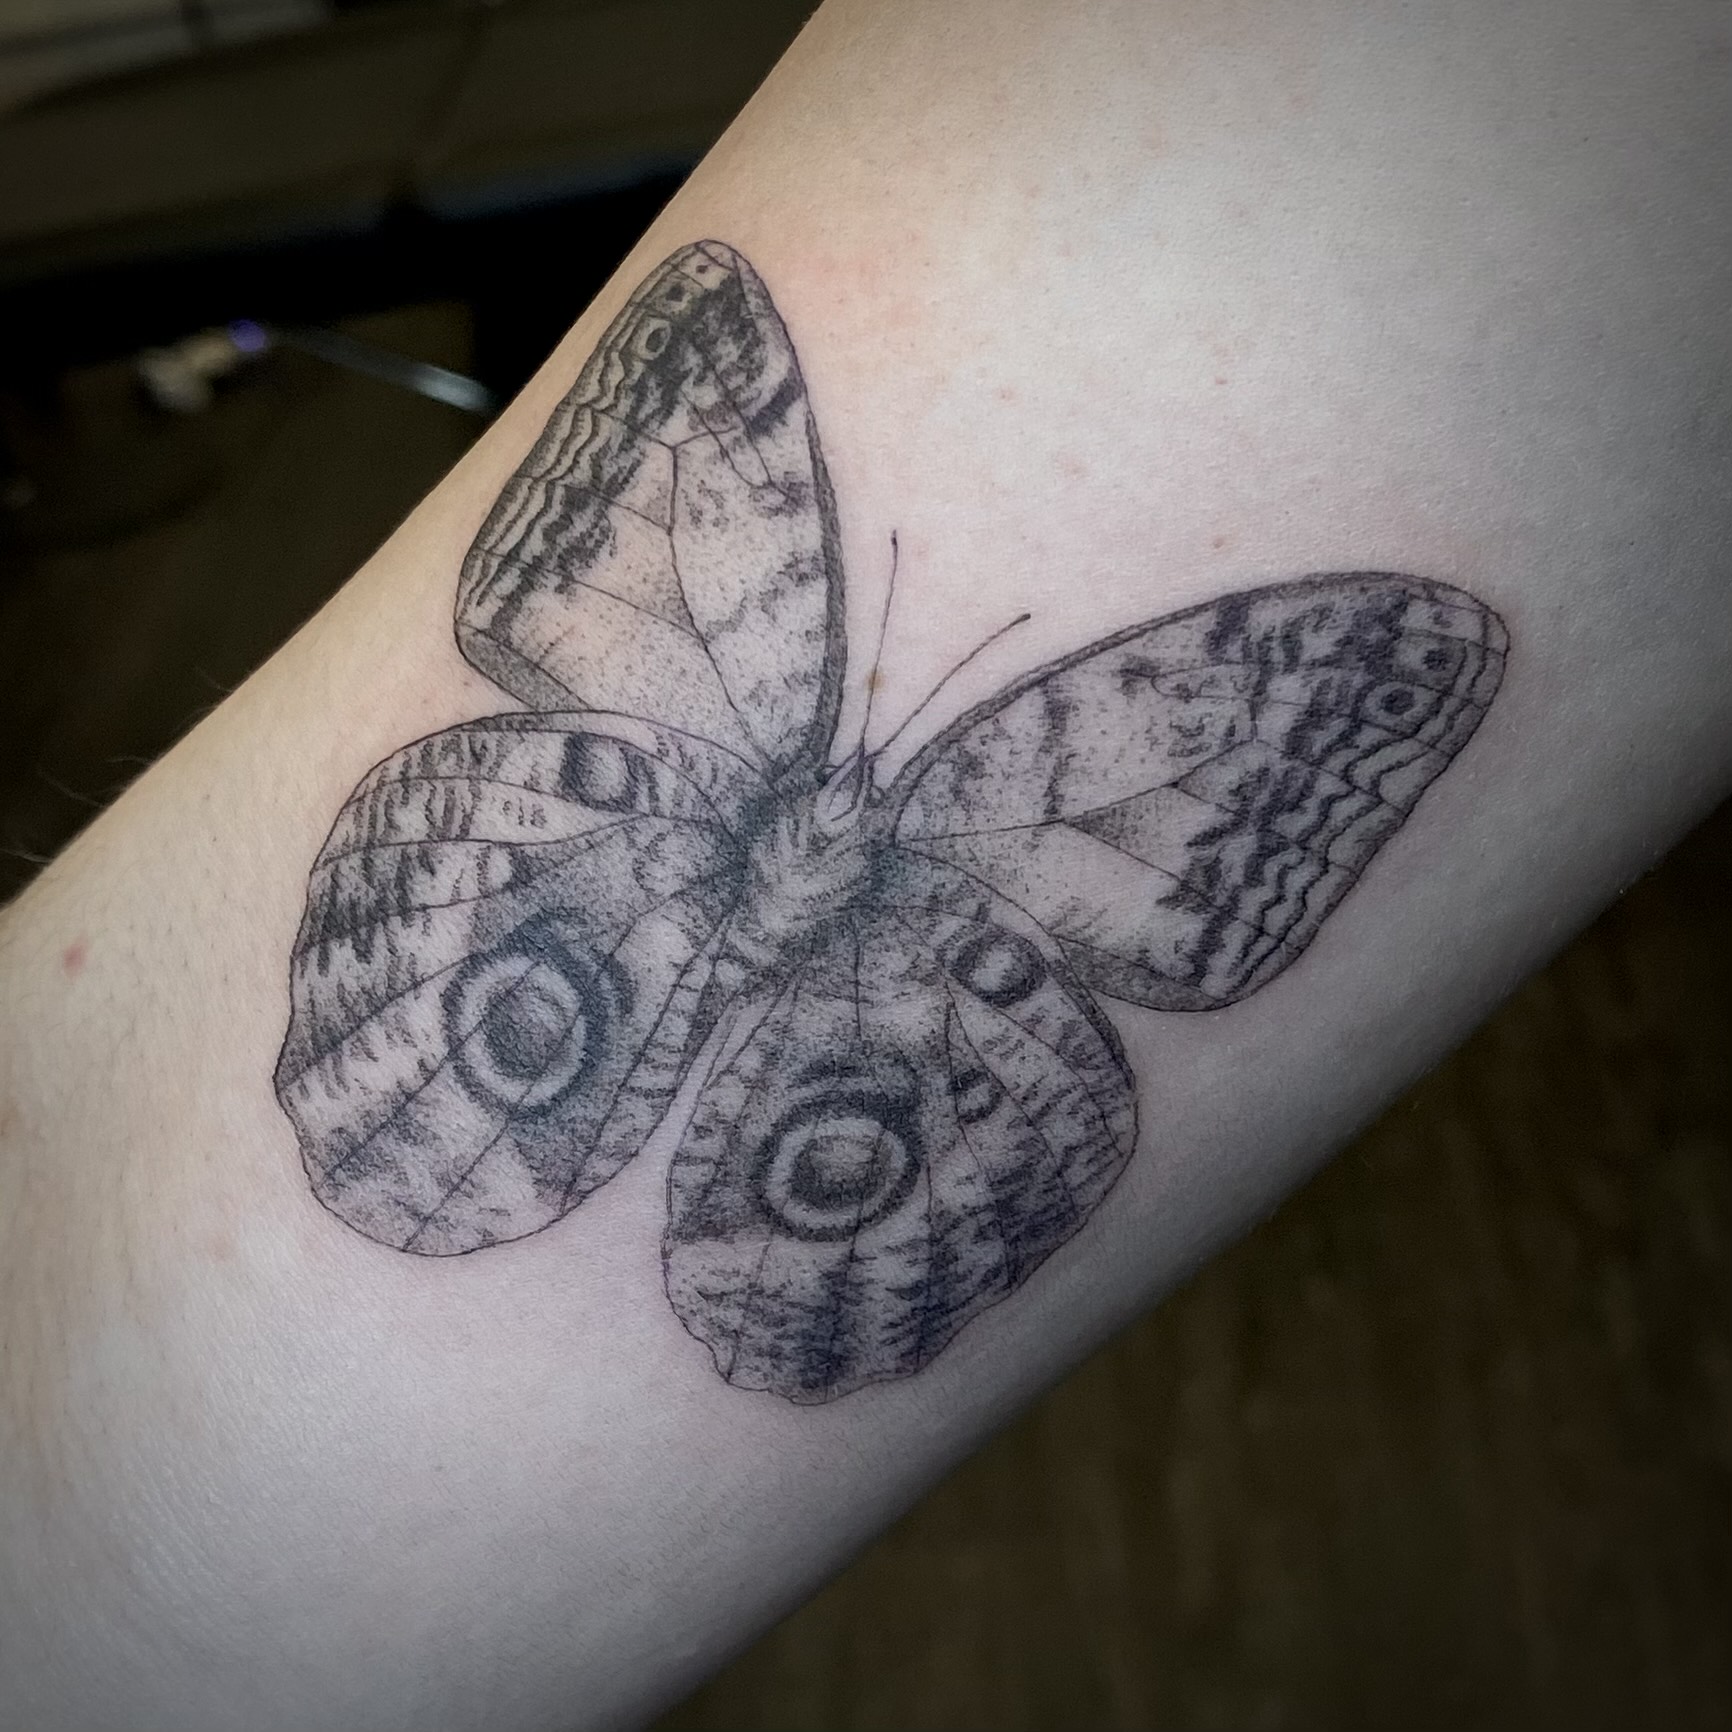 Black and grey detailed tattoo of a moth tattooed by Sarah Cherney of Sacred Mandala Studio.